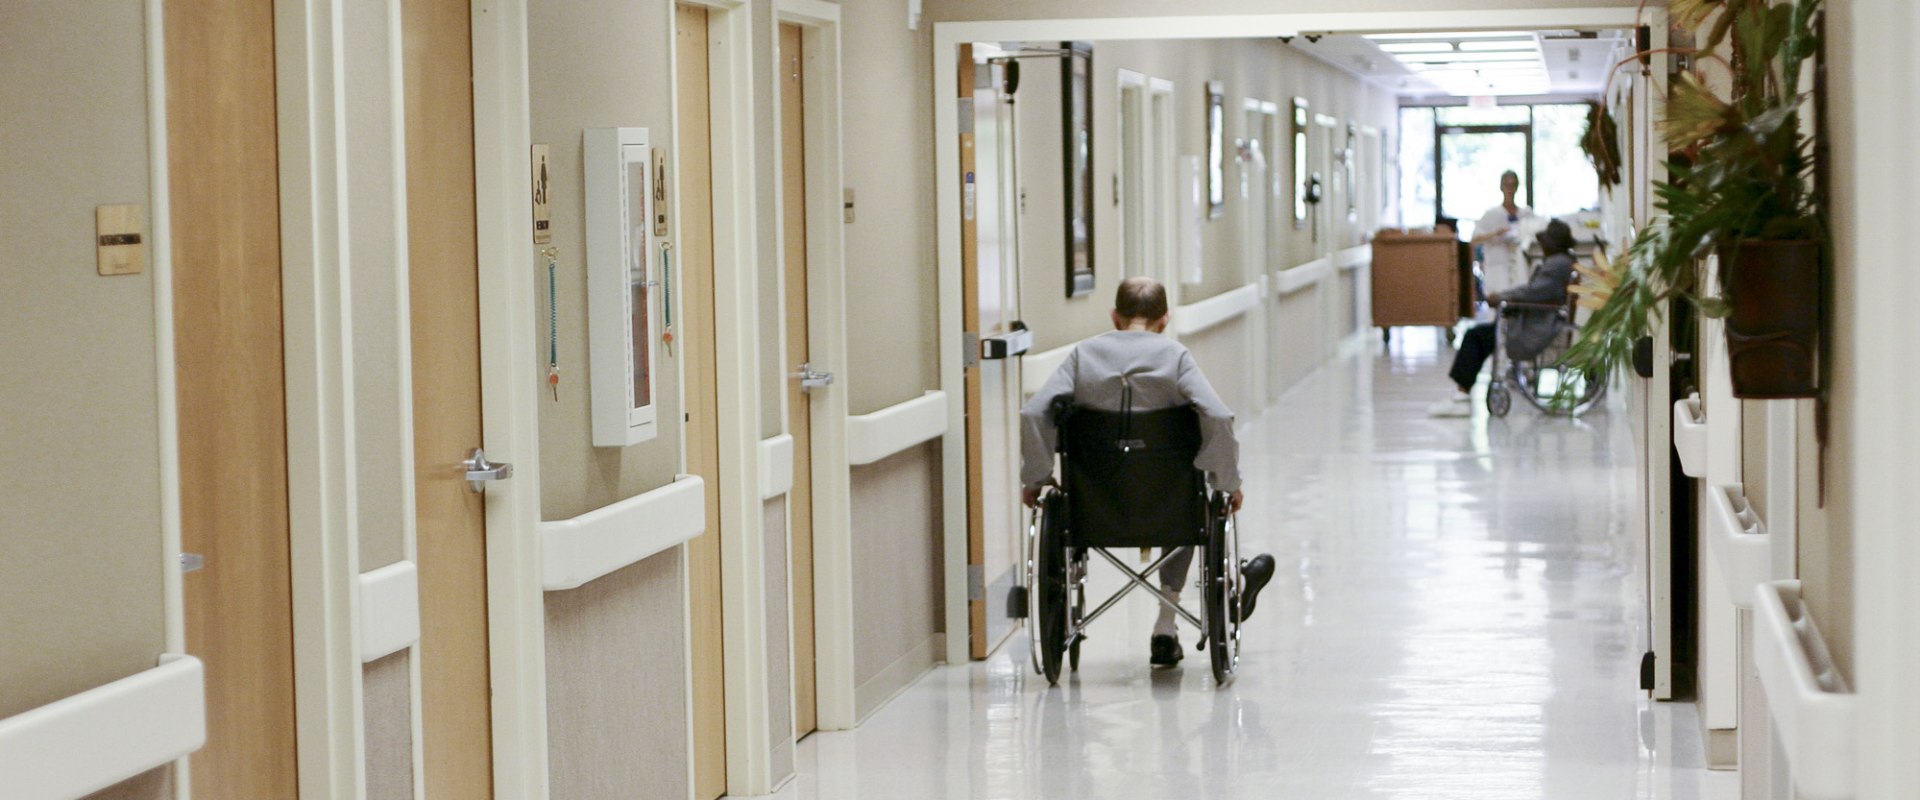 What are the issues in a nursing home?